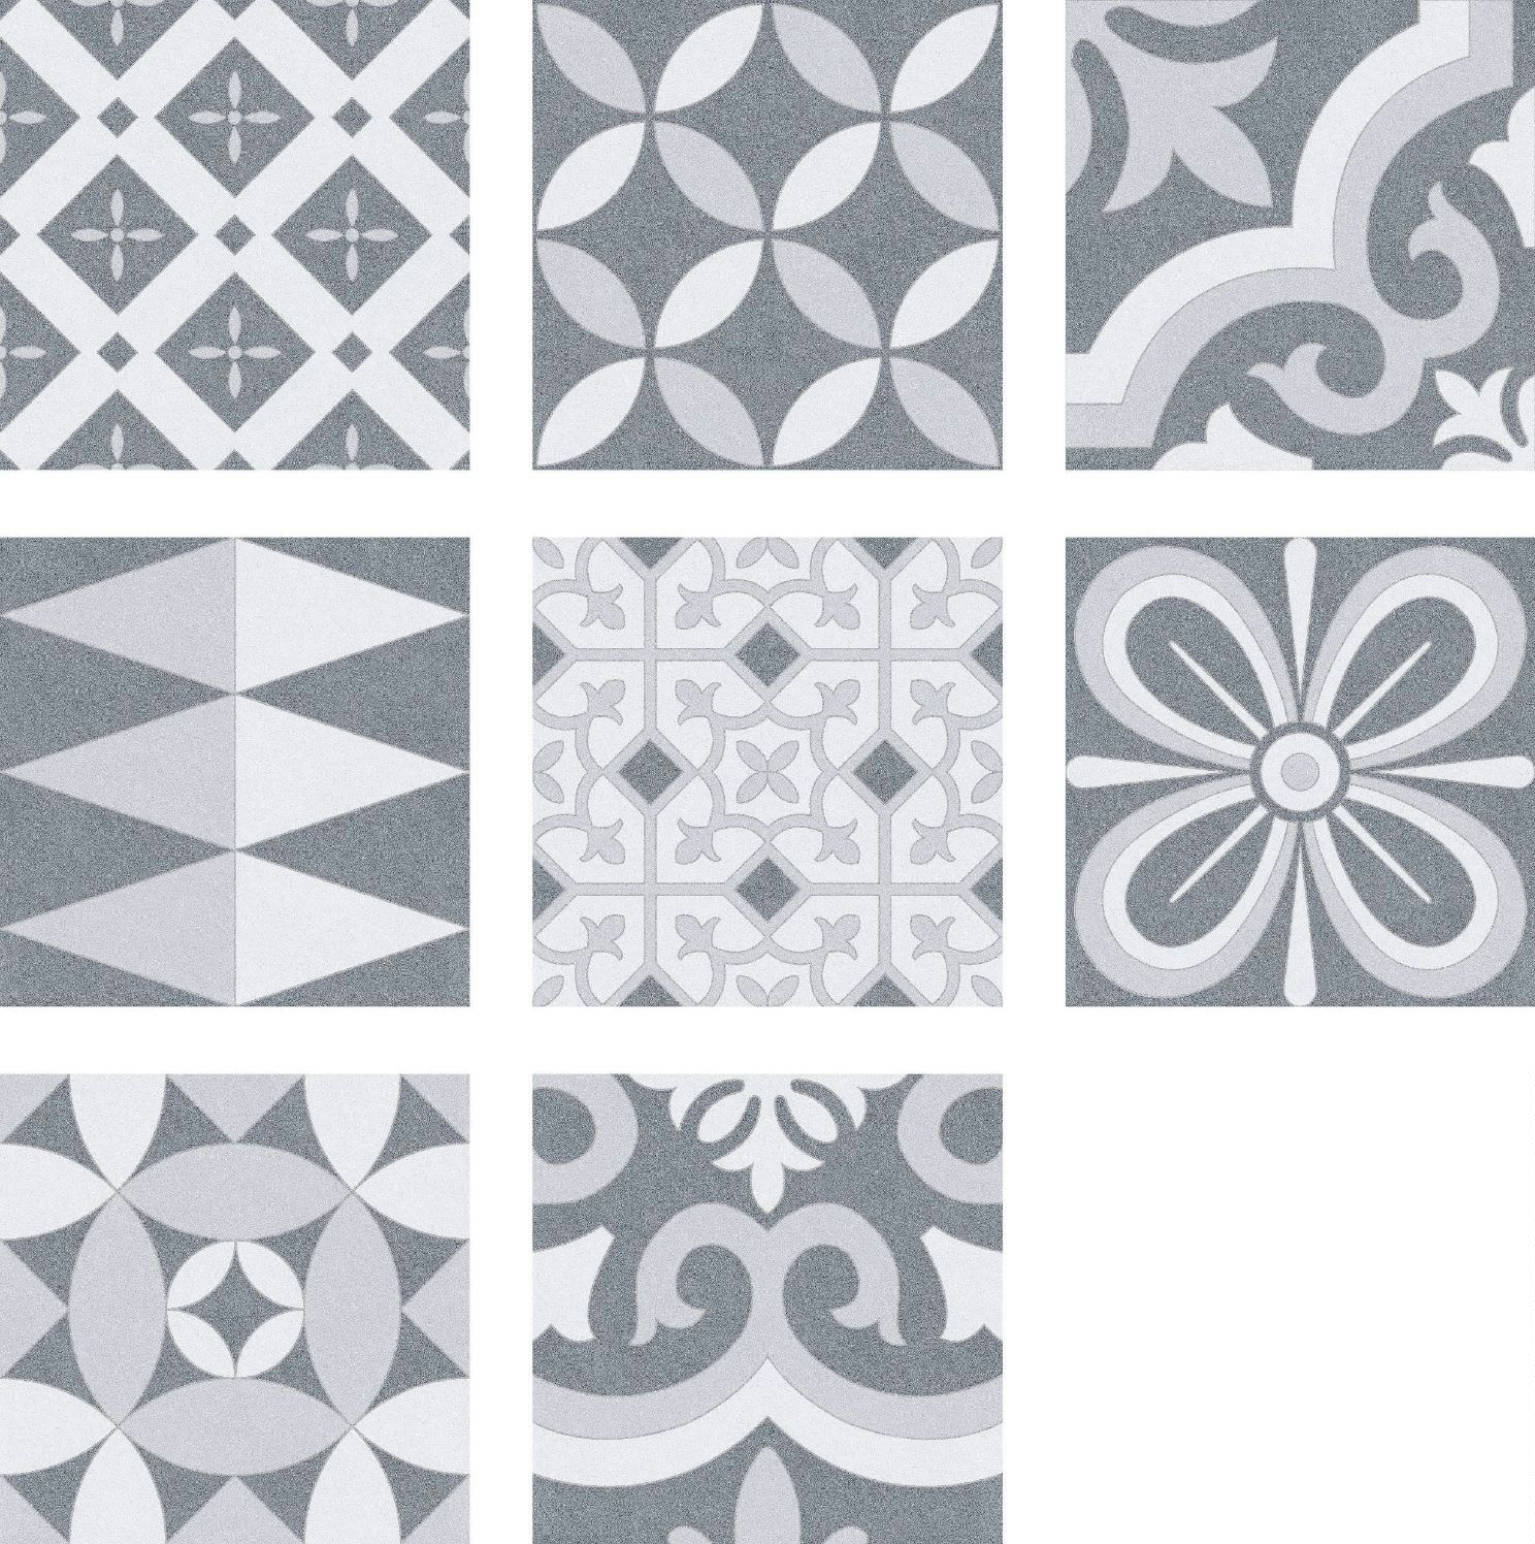 Miramar Patch | Stones & More | Finest selection of Mosaics, Glass, Tile and Stone